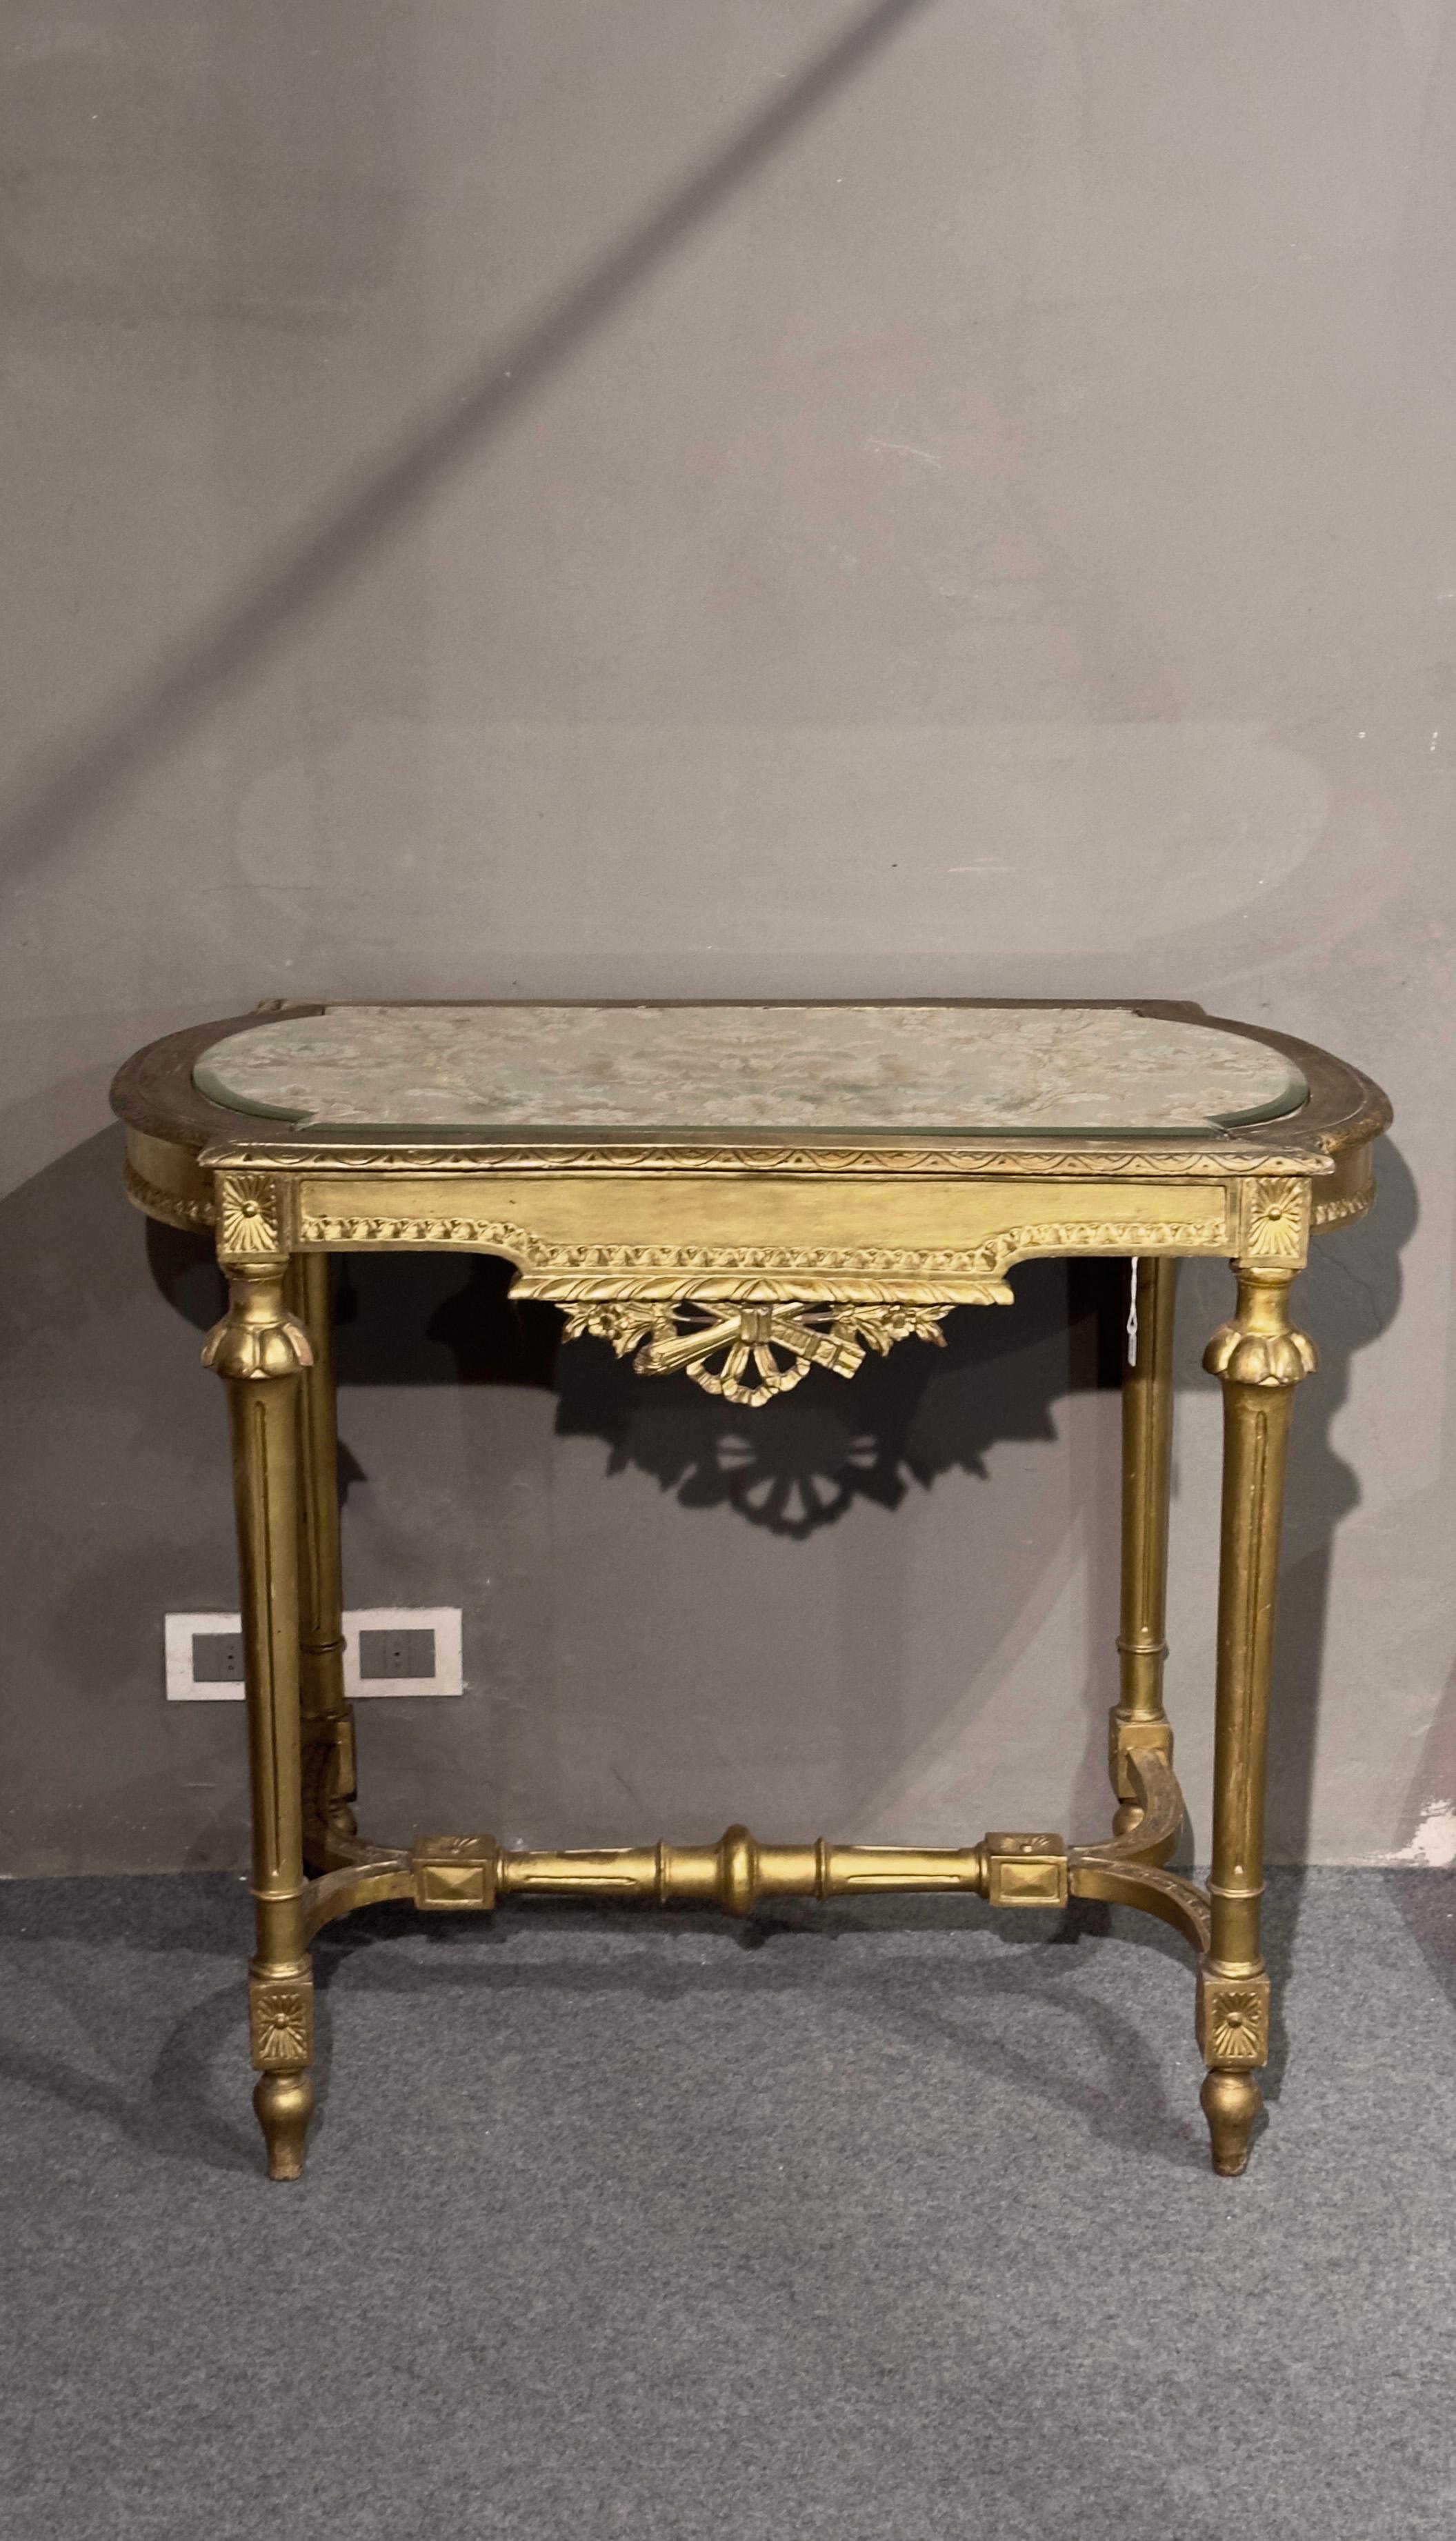 Splendid and elegant gilded wooden coffee table, in neoclassical style. The rectangular top with circular sides is enriched by a refined fabric covered by glass, which gives further charm to the piece of furniture. The decorations, inspired by the